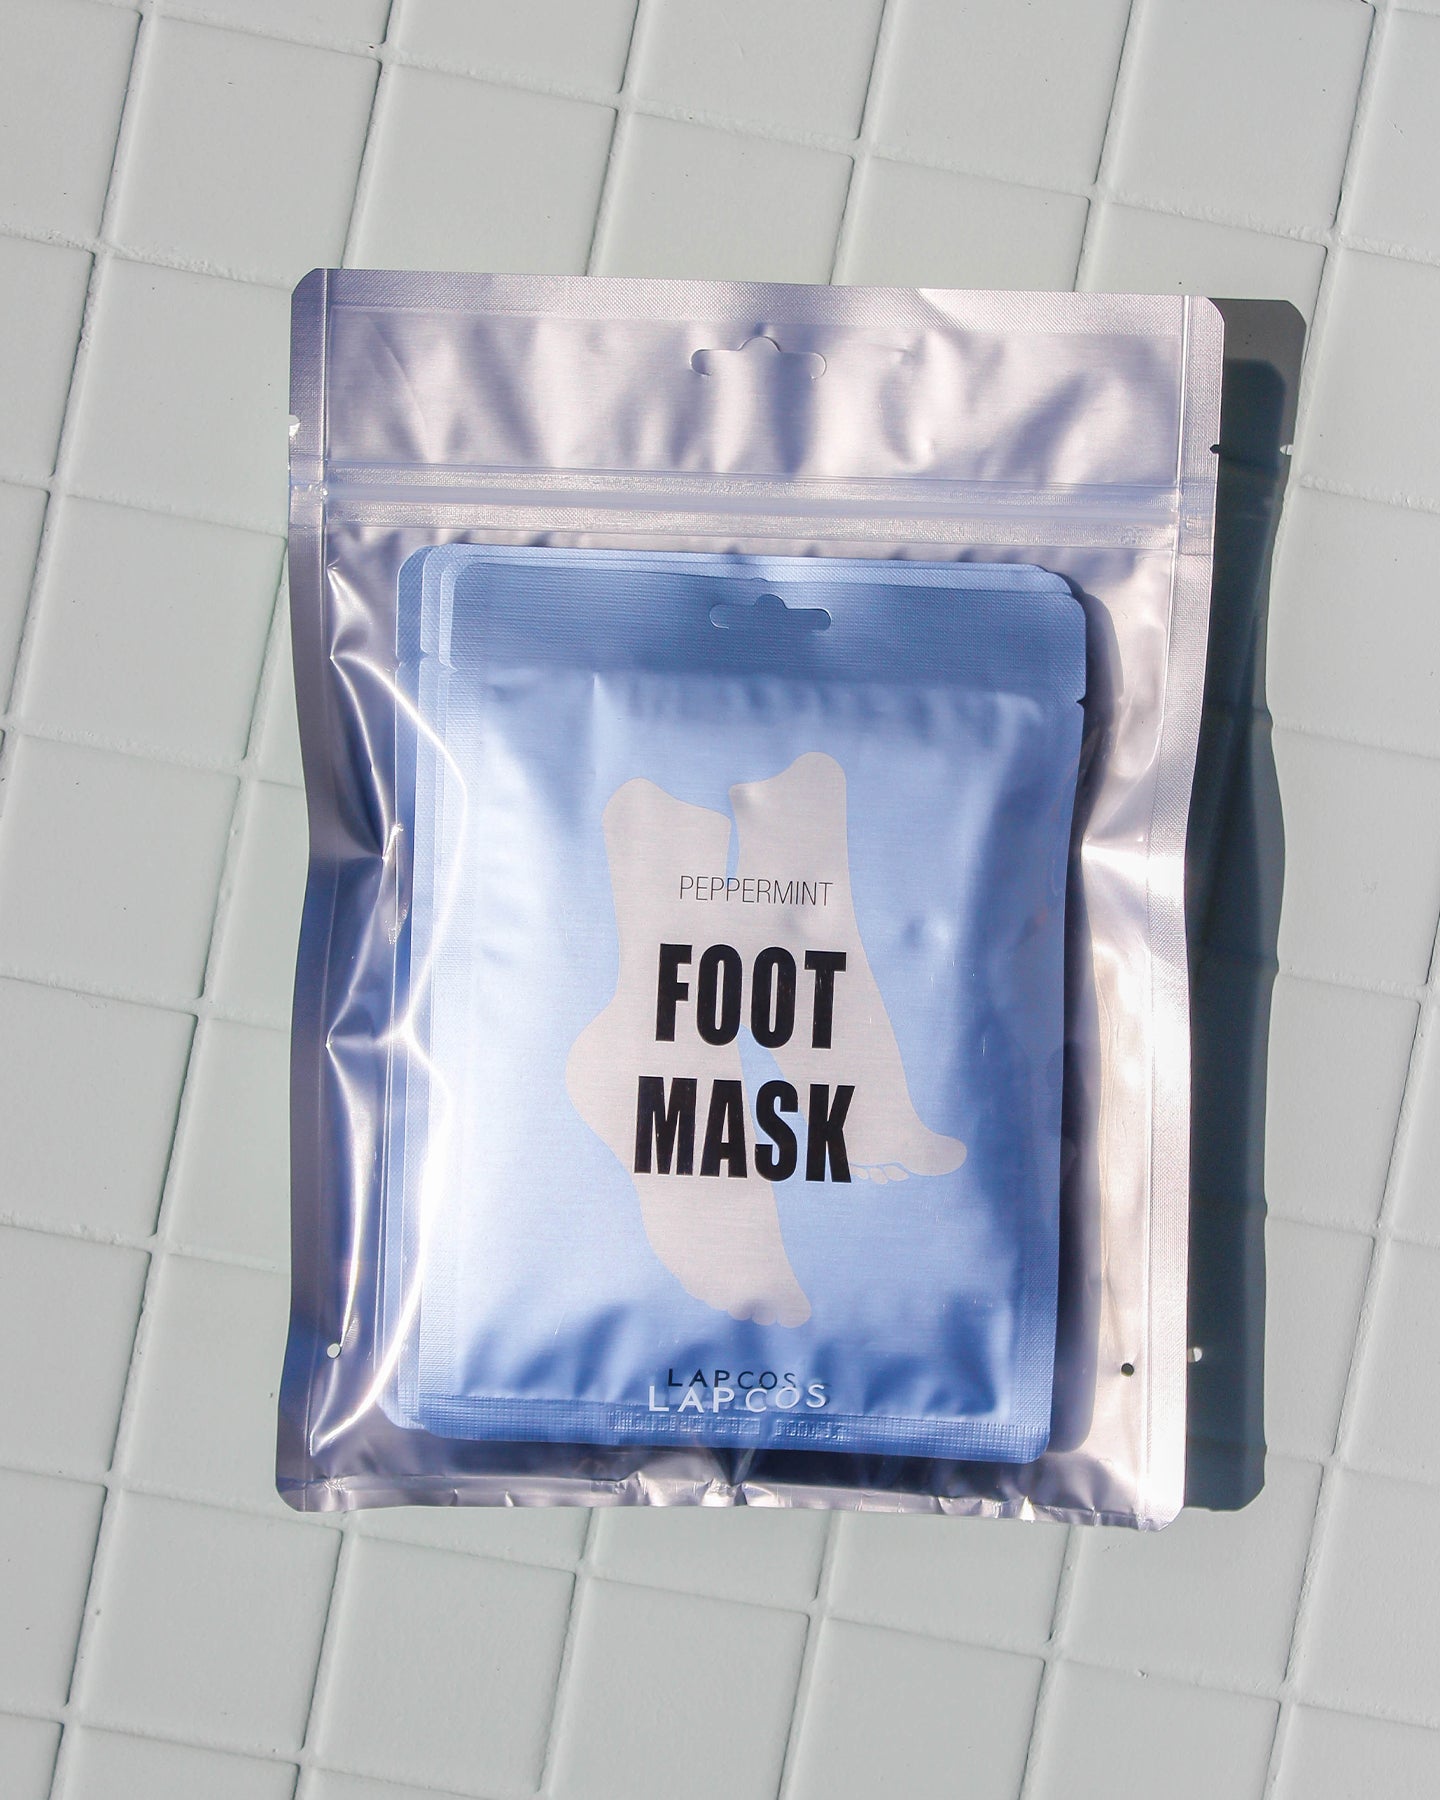 LAPCOS Peppermint Foot Mask